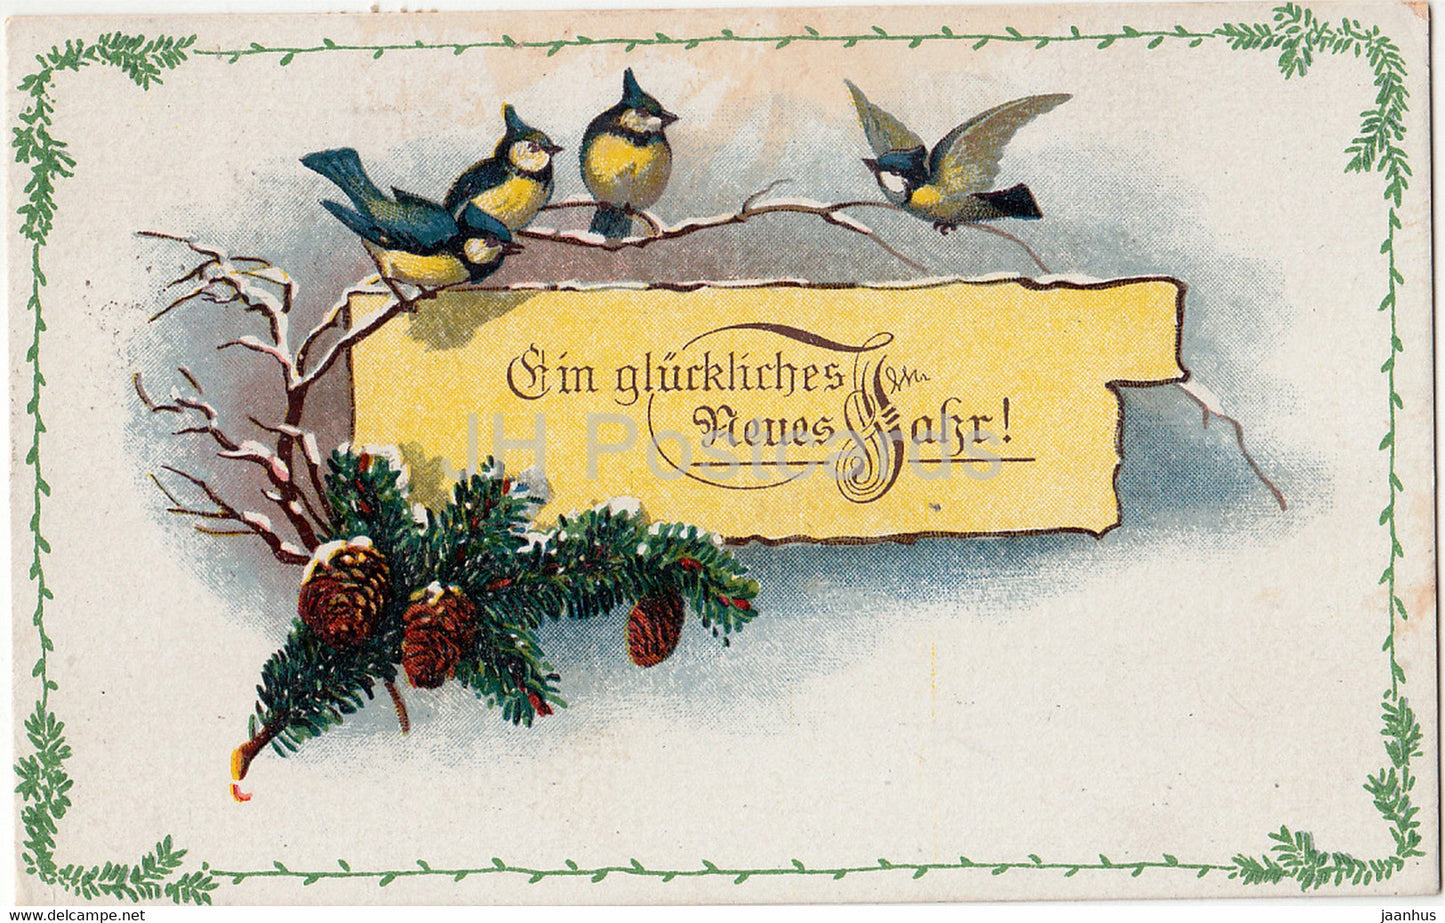 New Year Greeting Card - Ein Gluckliches neues Jahr - birds - blue tit - S V D - old postcard - 1923 - Germany - used - JH Postcards